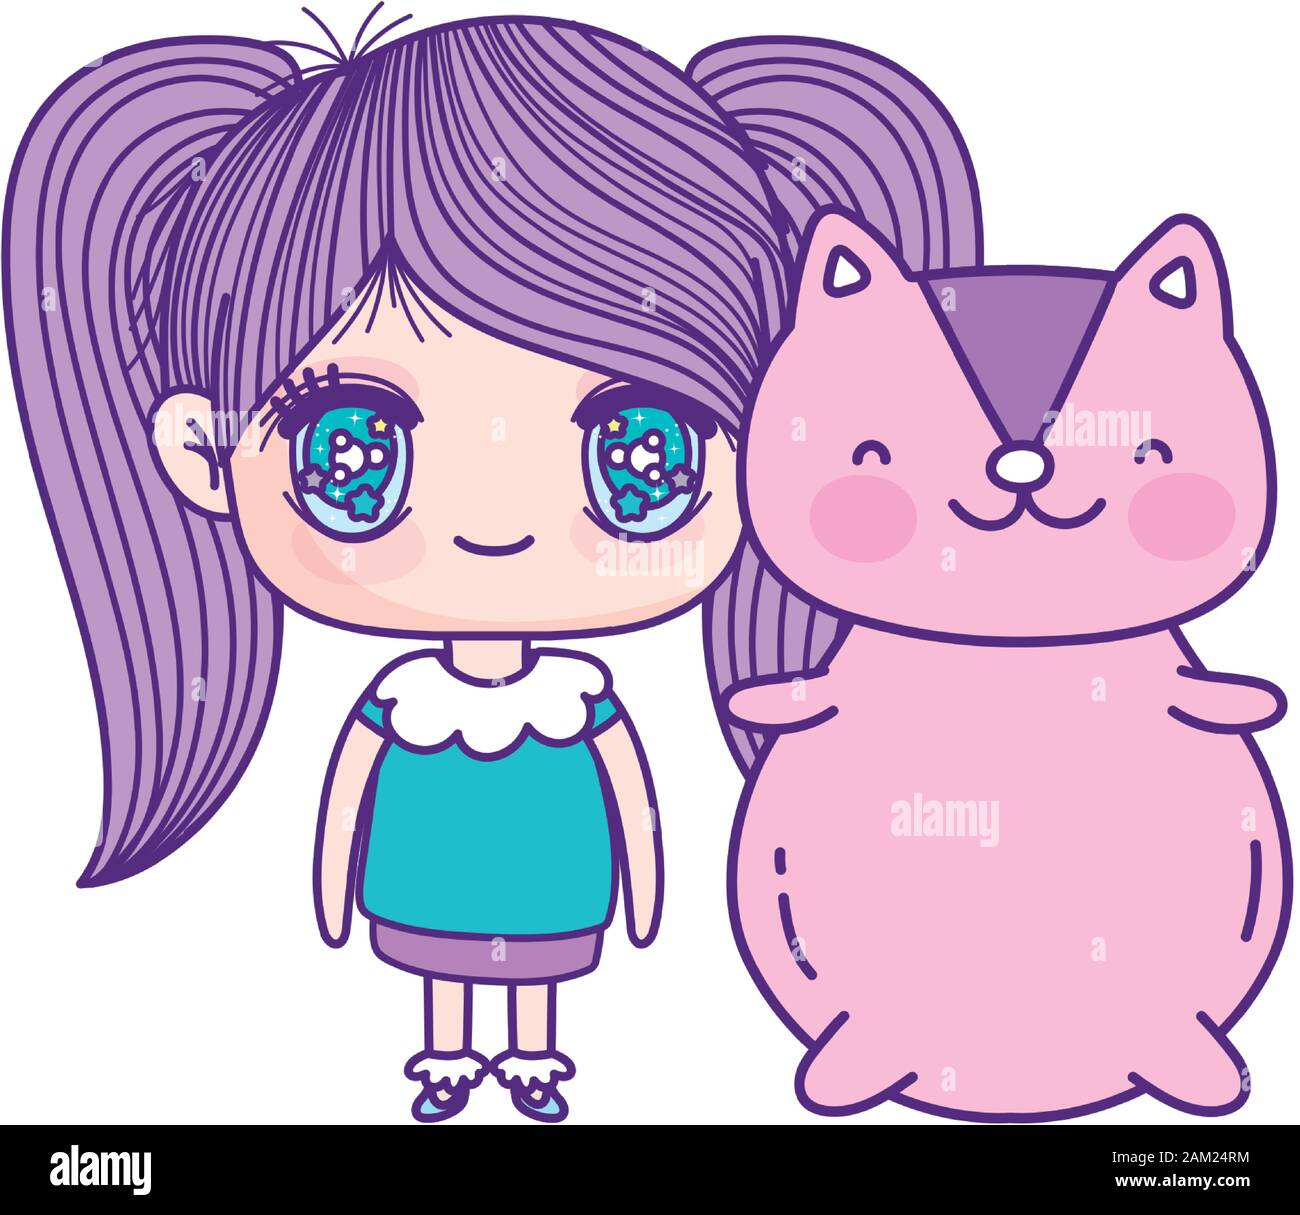 Kids, Cute Little Girl Anime Cartoon And Cute Squirrel Vector Illustration  Royalty Free SVG, Cliparts, Vectors, and Stock Illustration. Image  138046566.